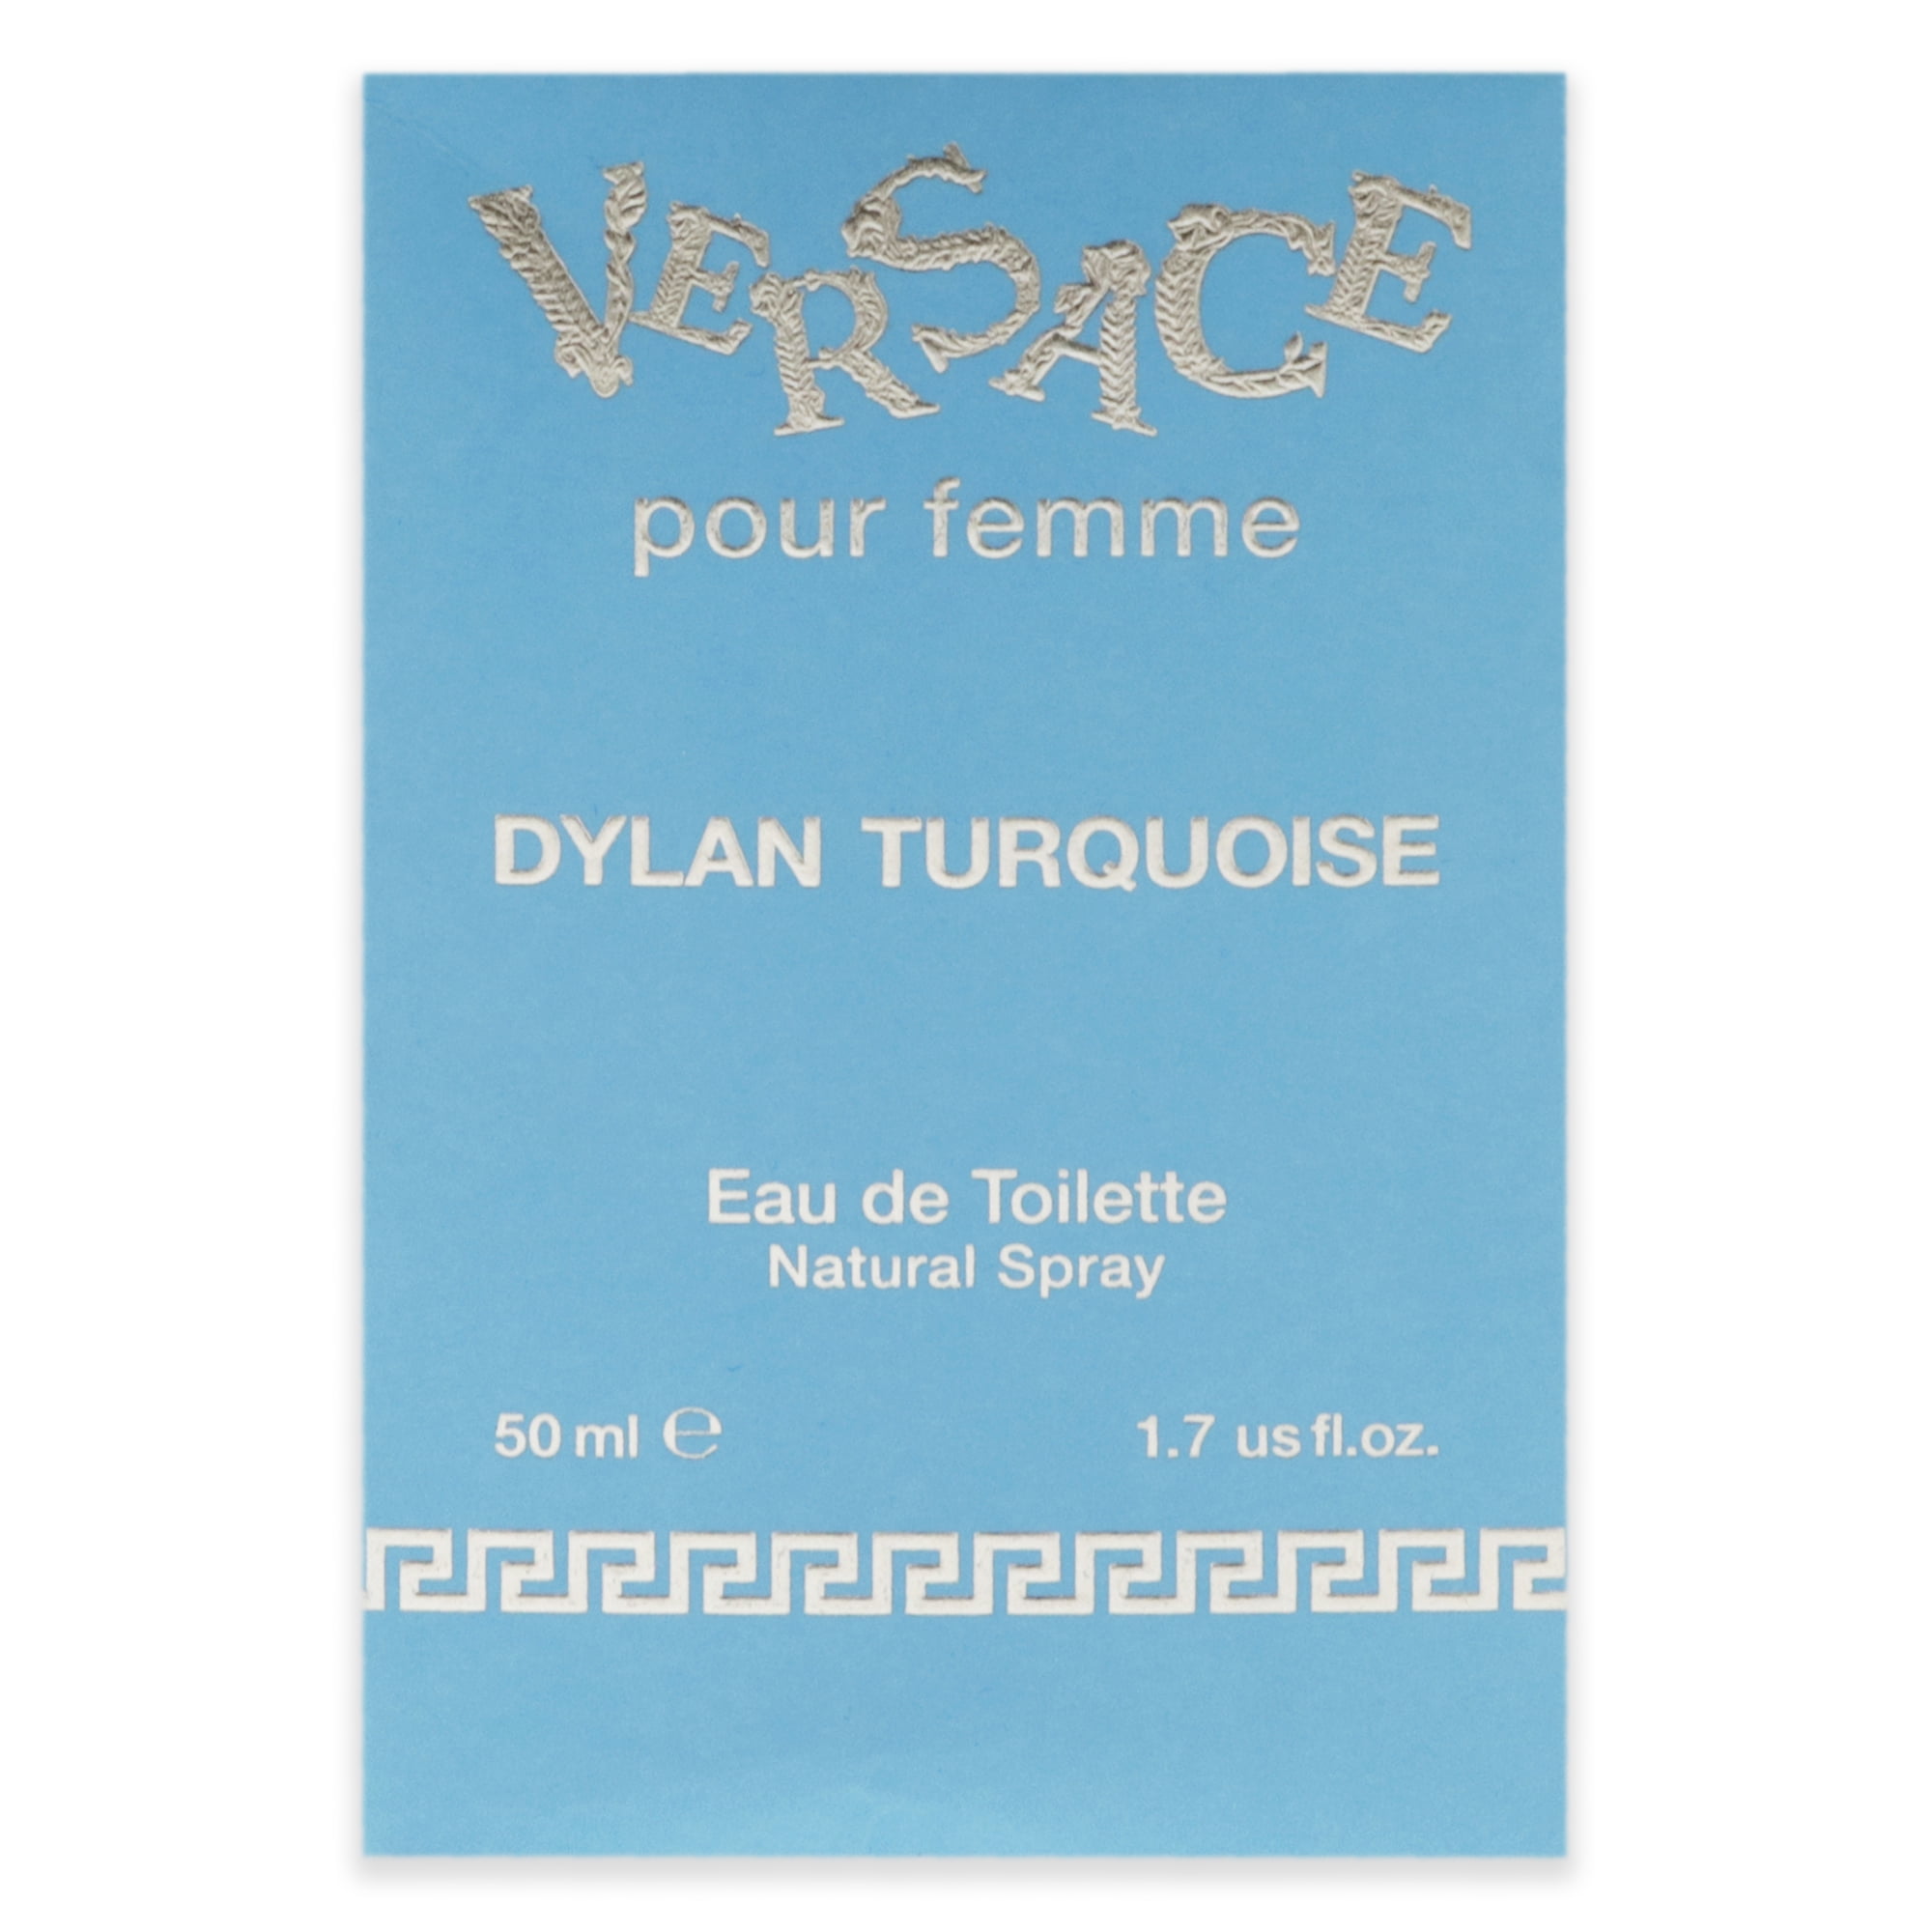 Dylan Turquoise Pour Femme by Versace for Women - 1.7 oz EDT Spray